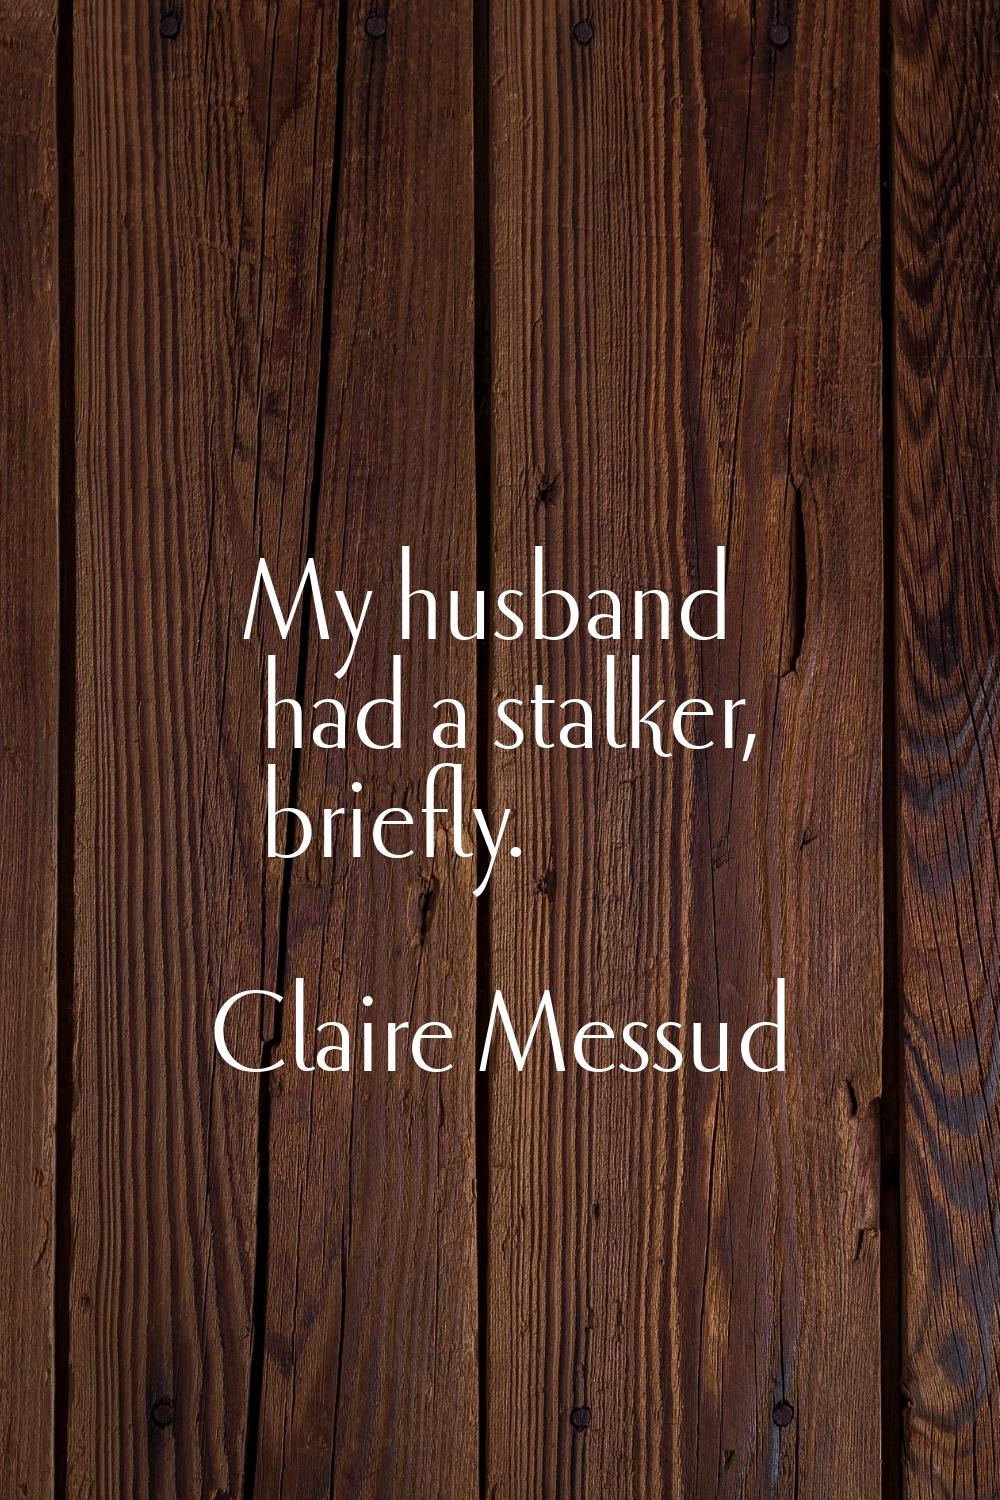 My husband had a stalker, briefly.